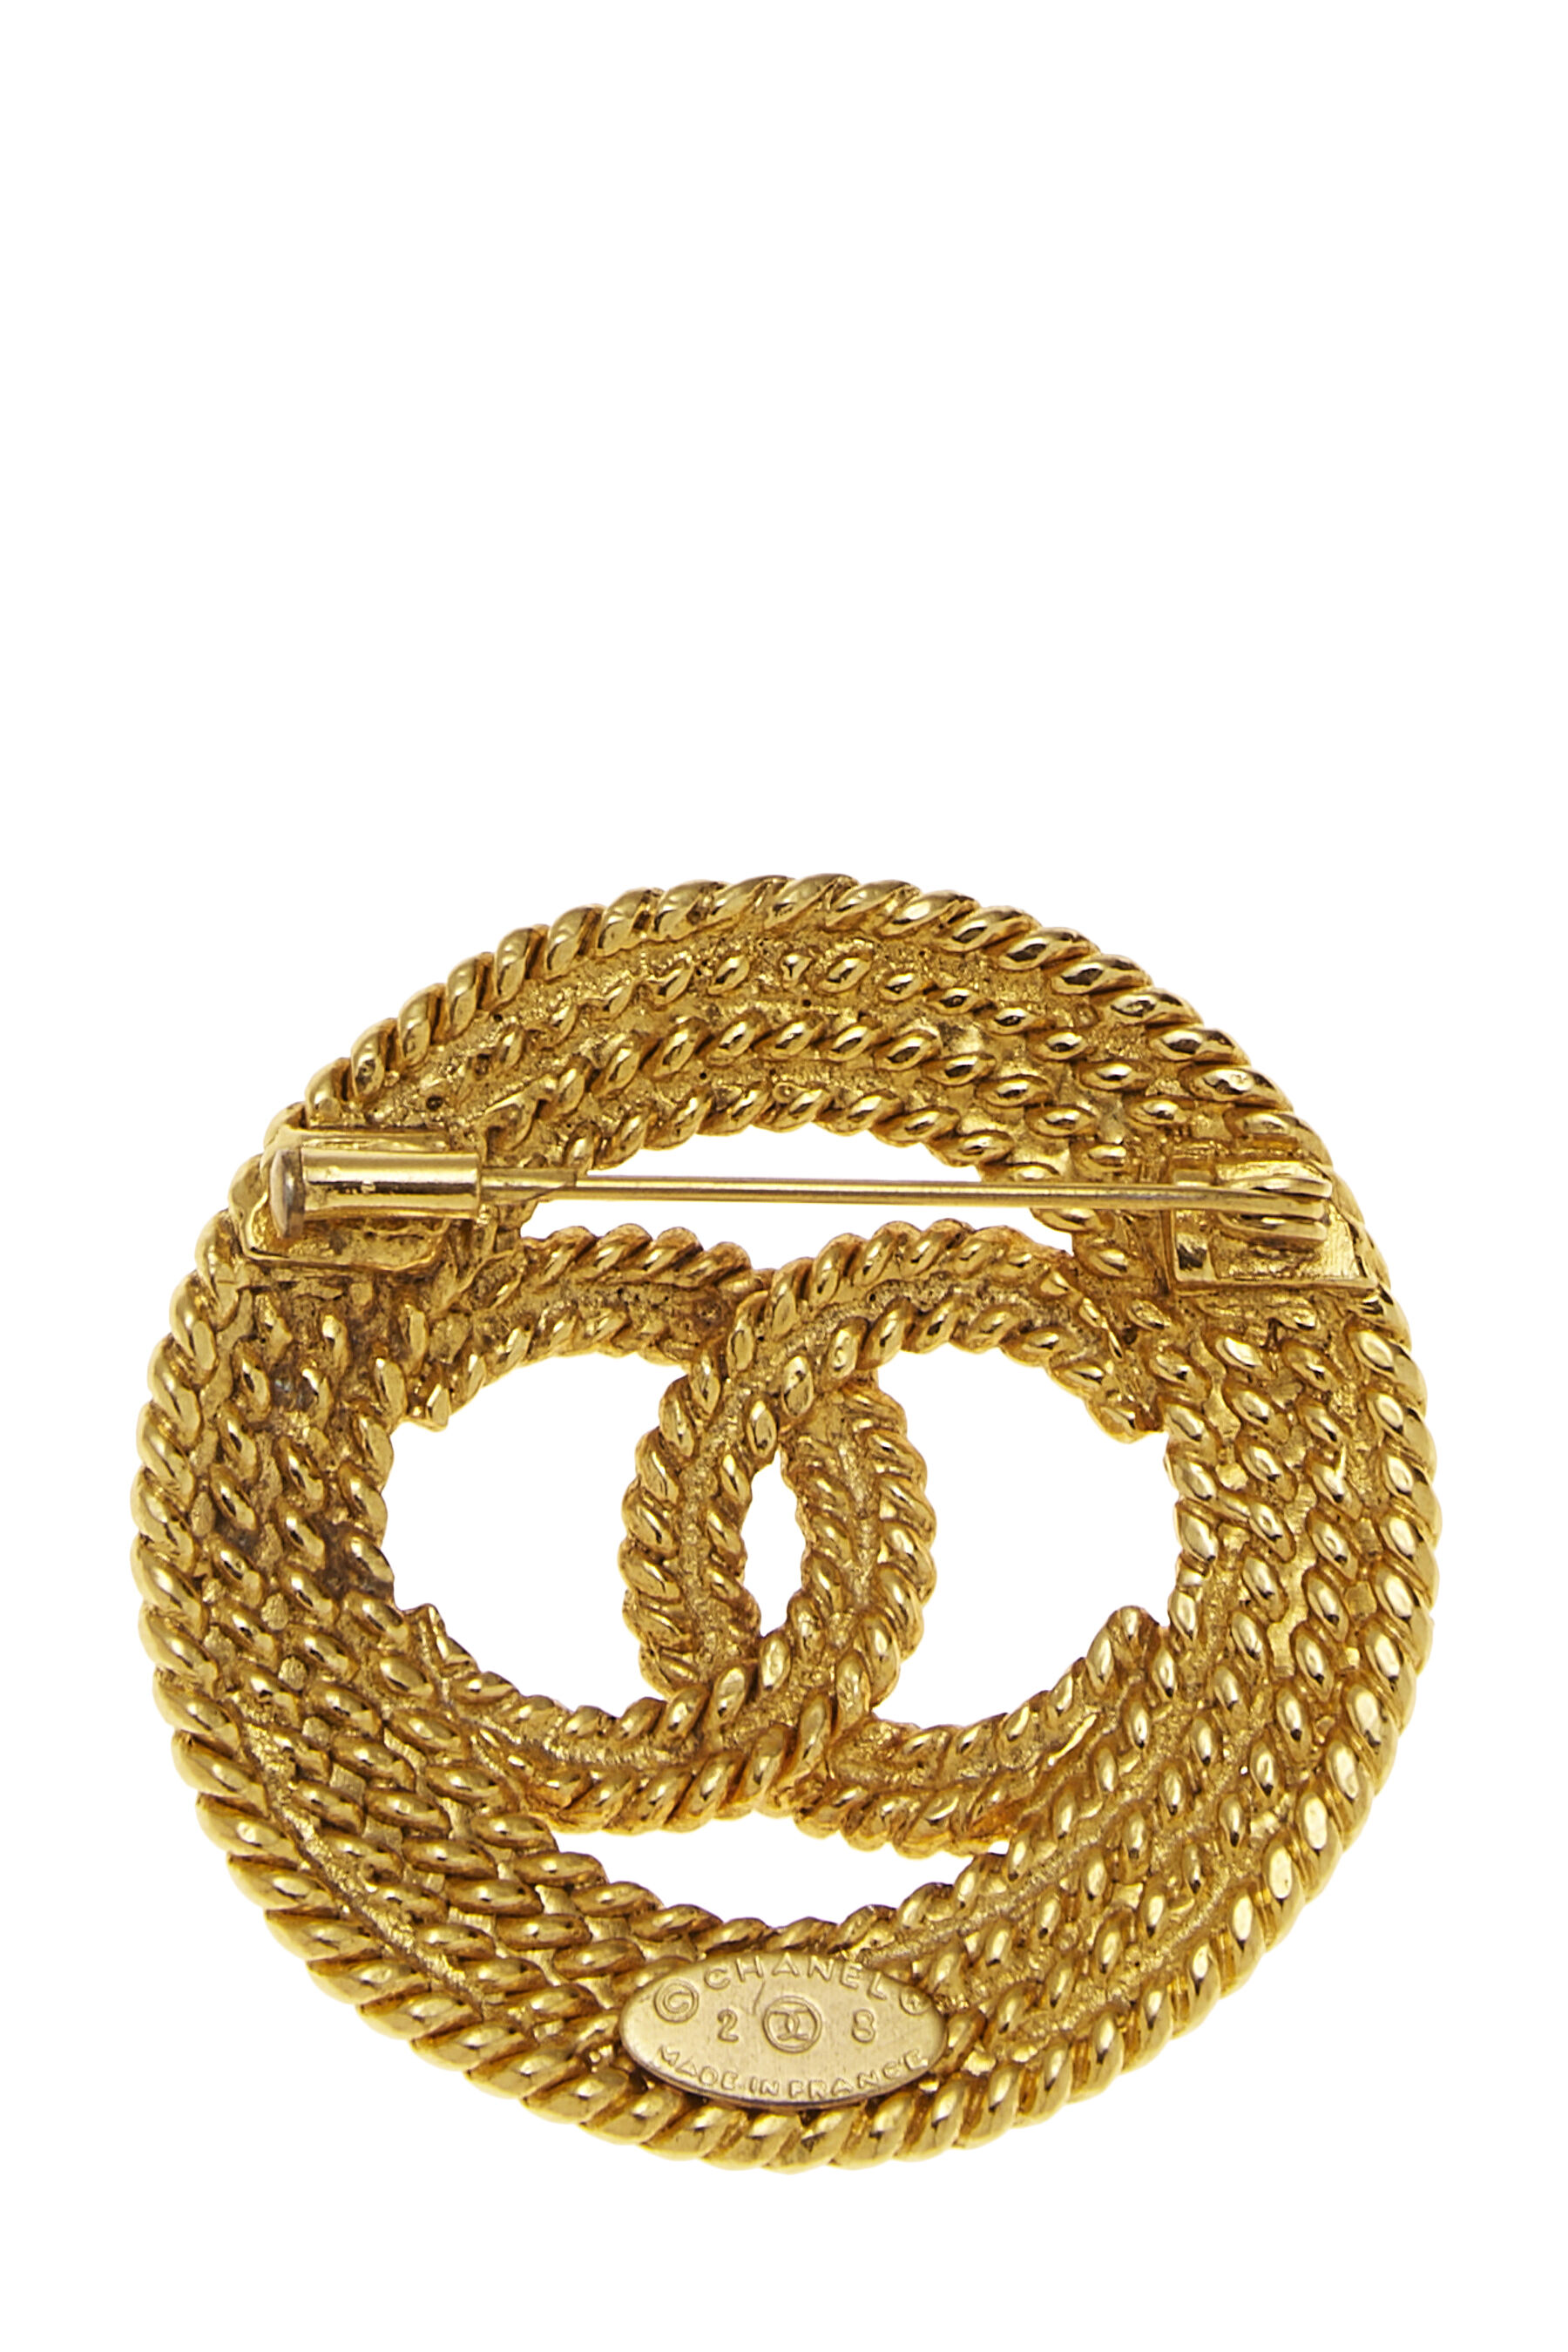 Chanel - Gold Rope 'CC' Pin